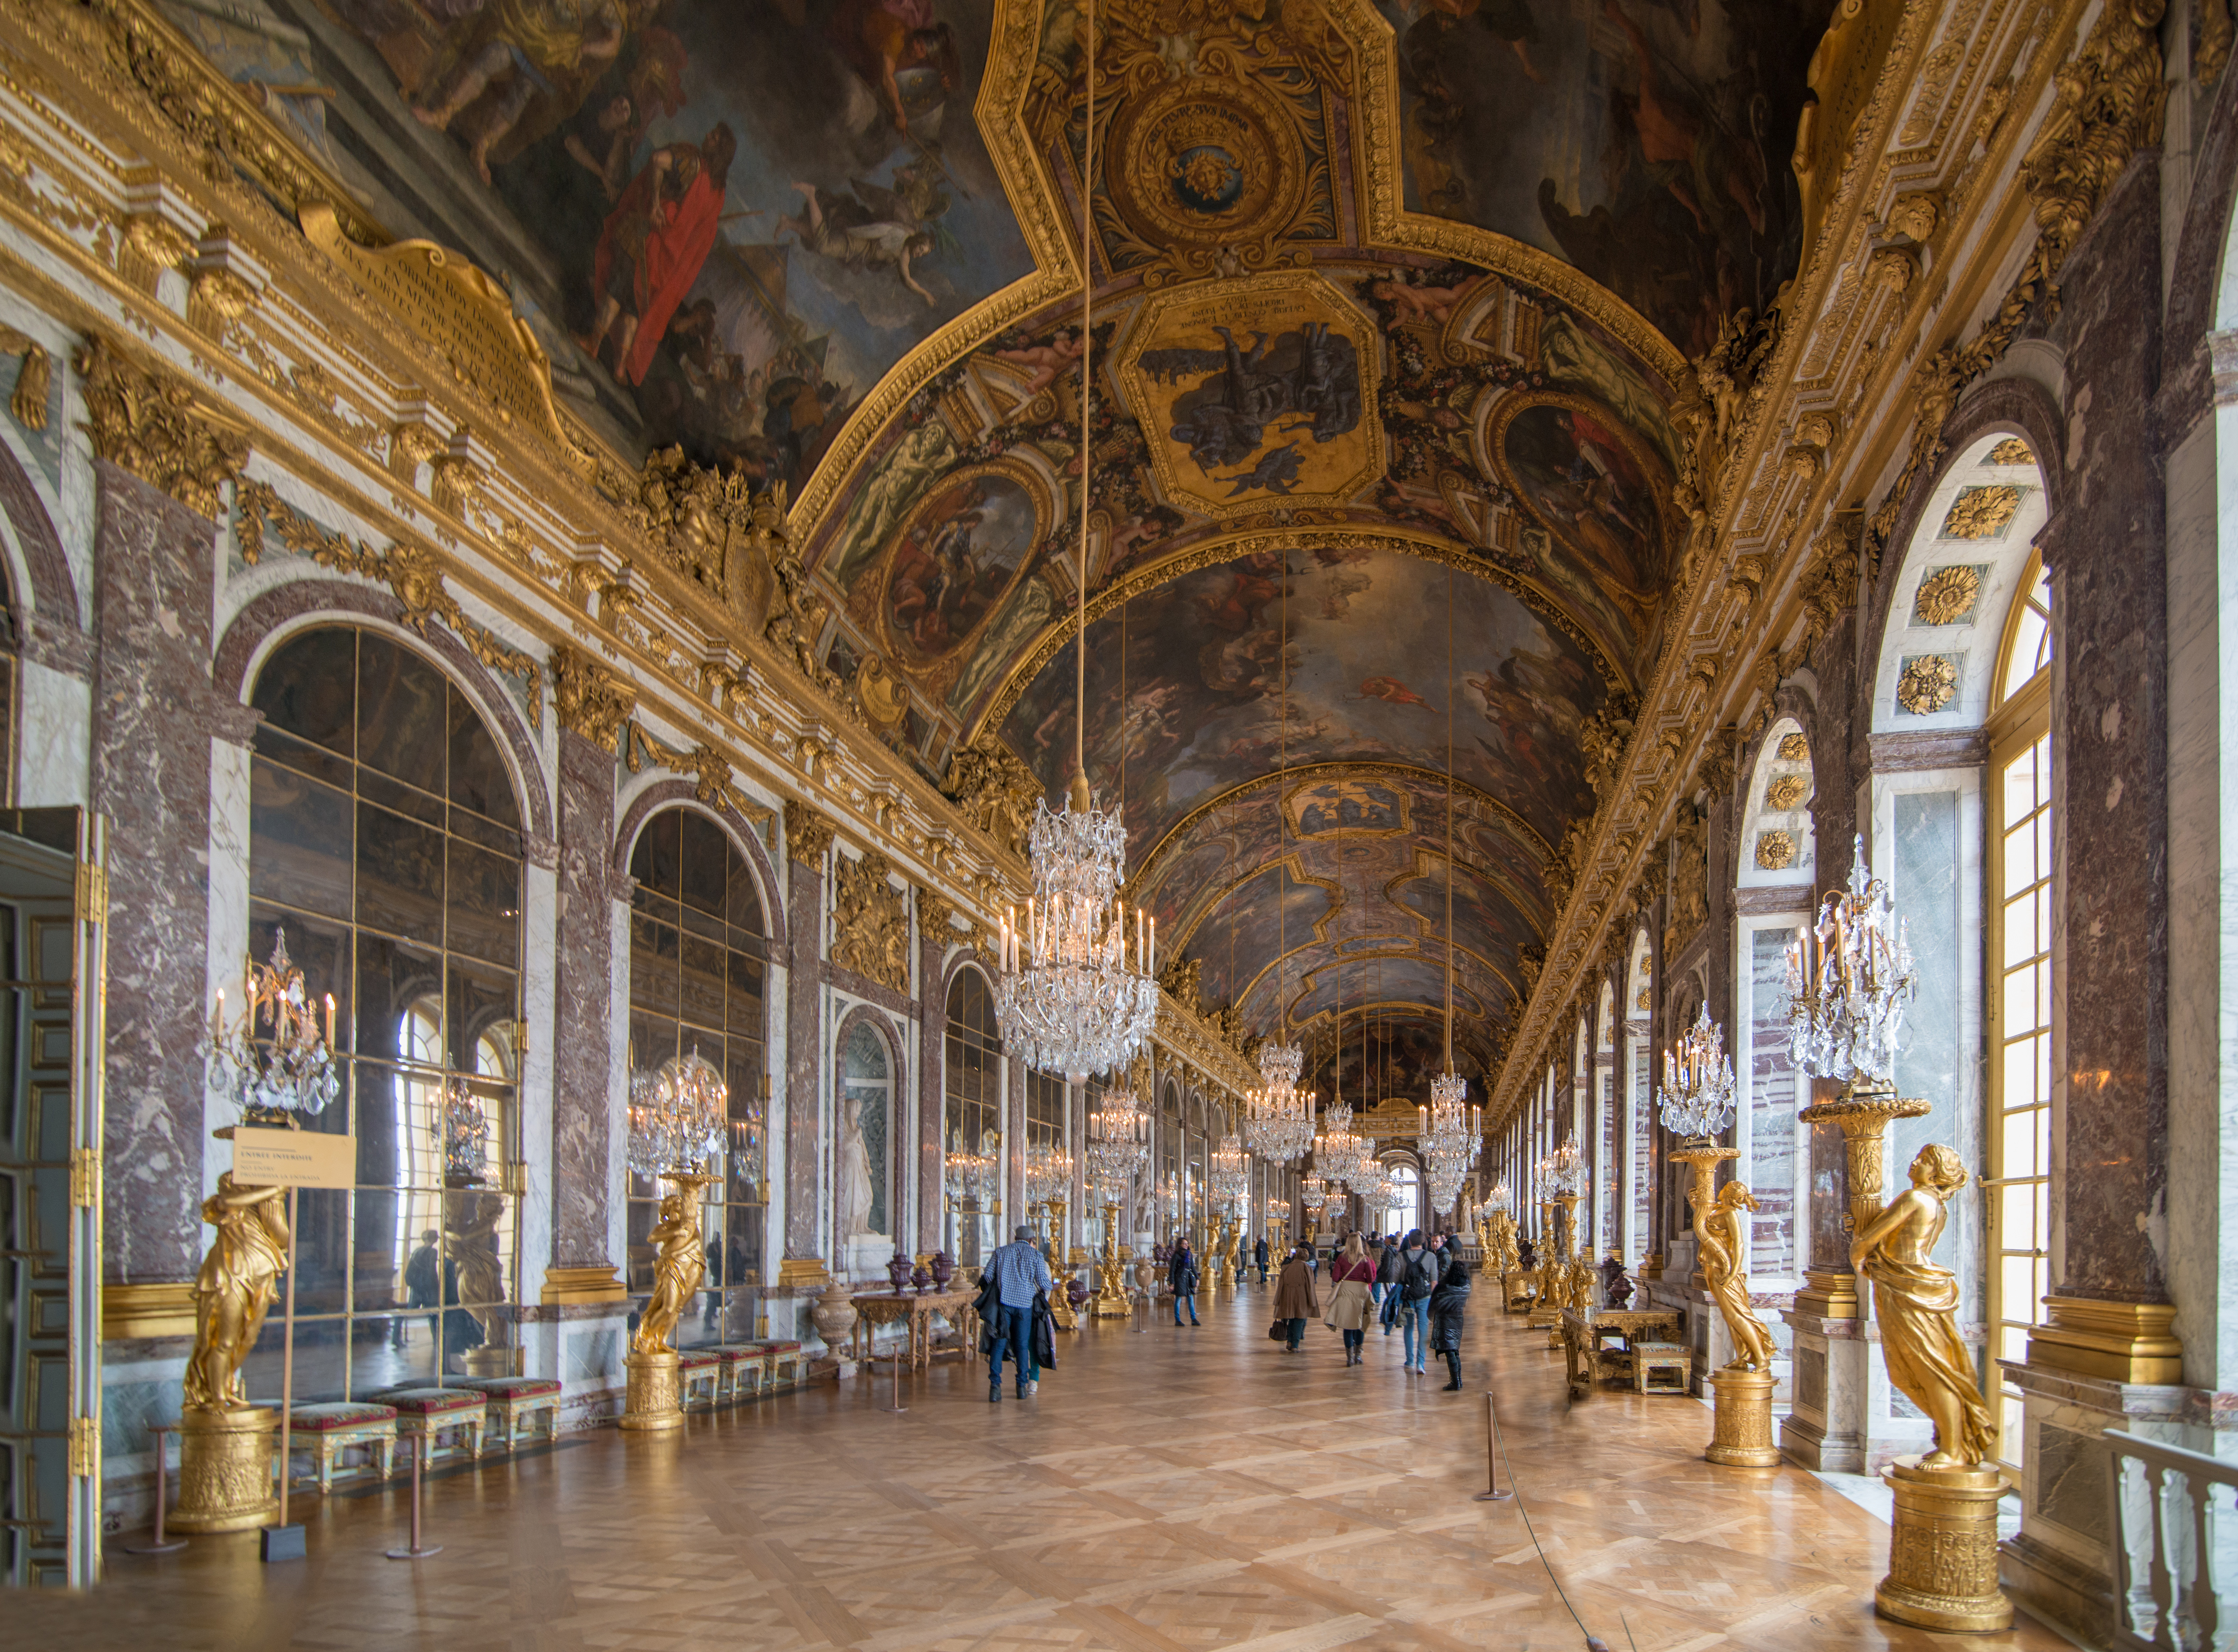 Image of Hall of Mirrors